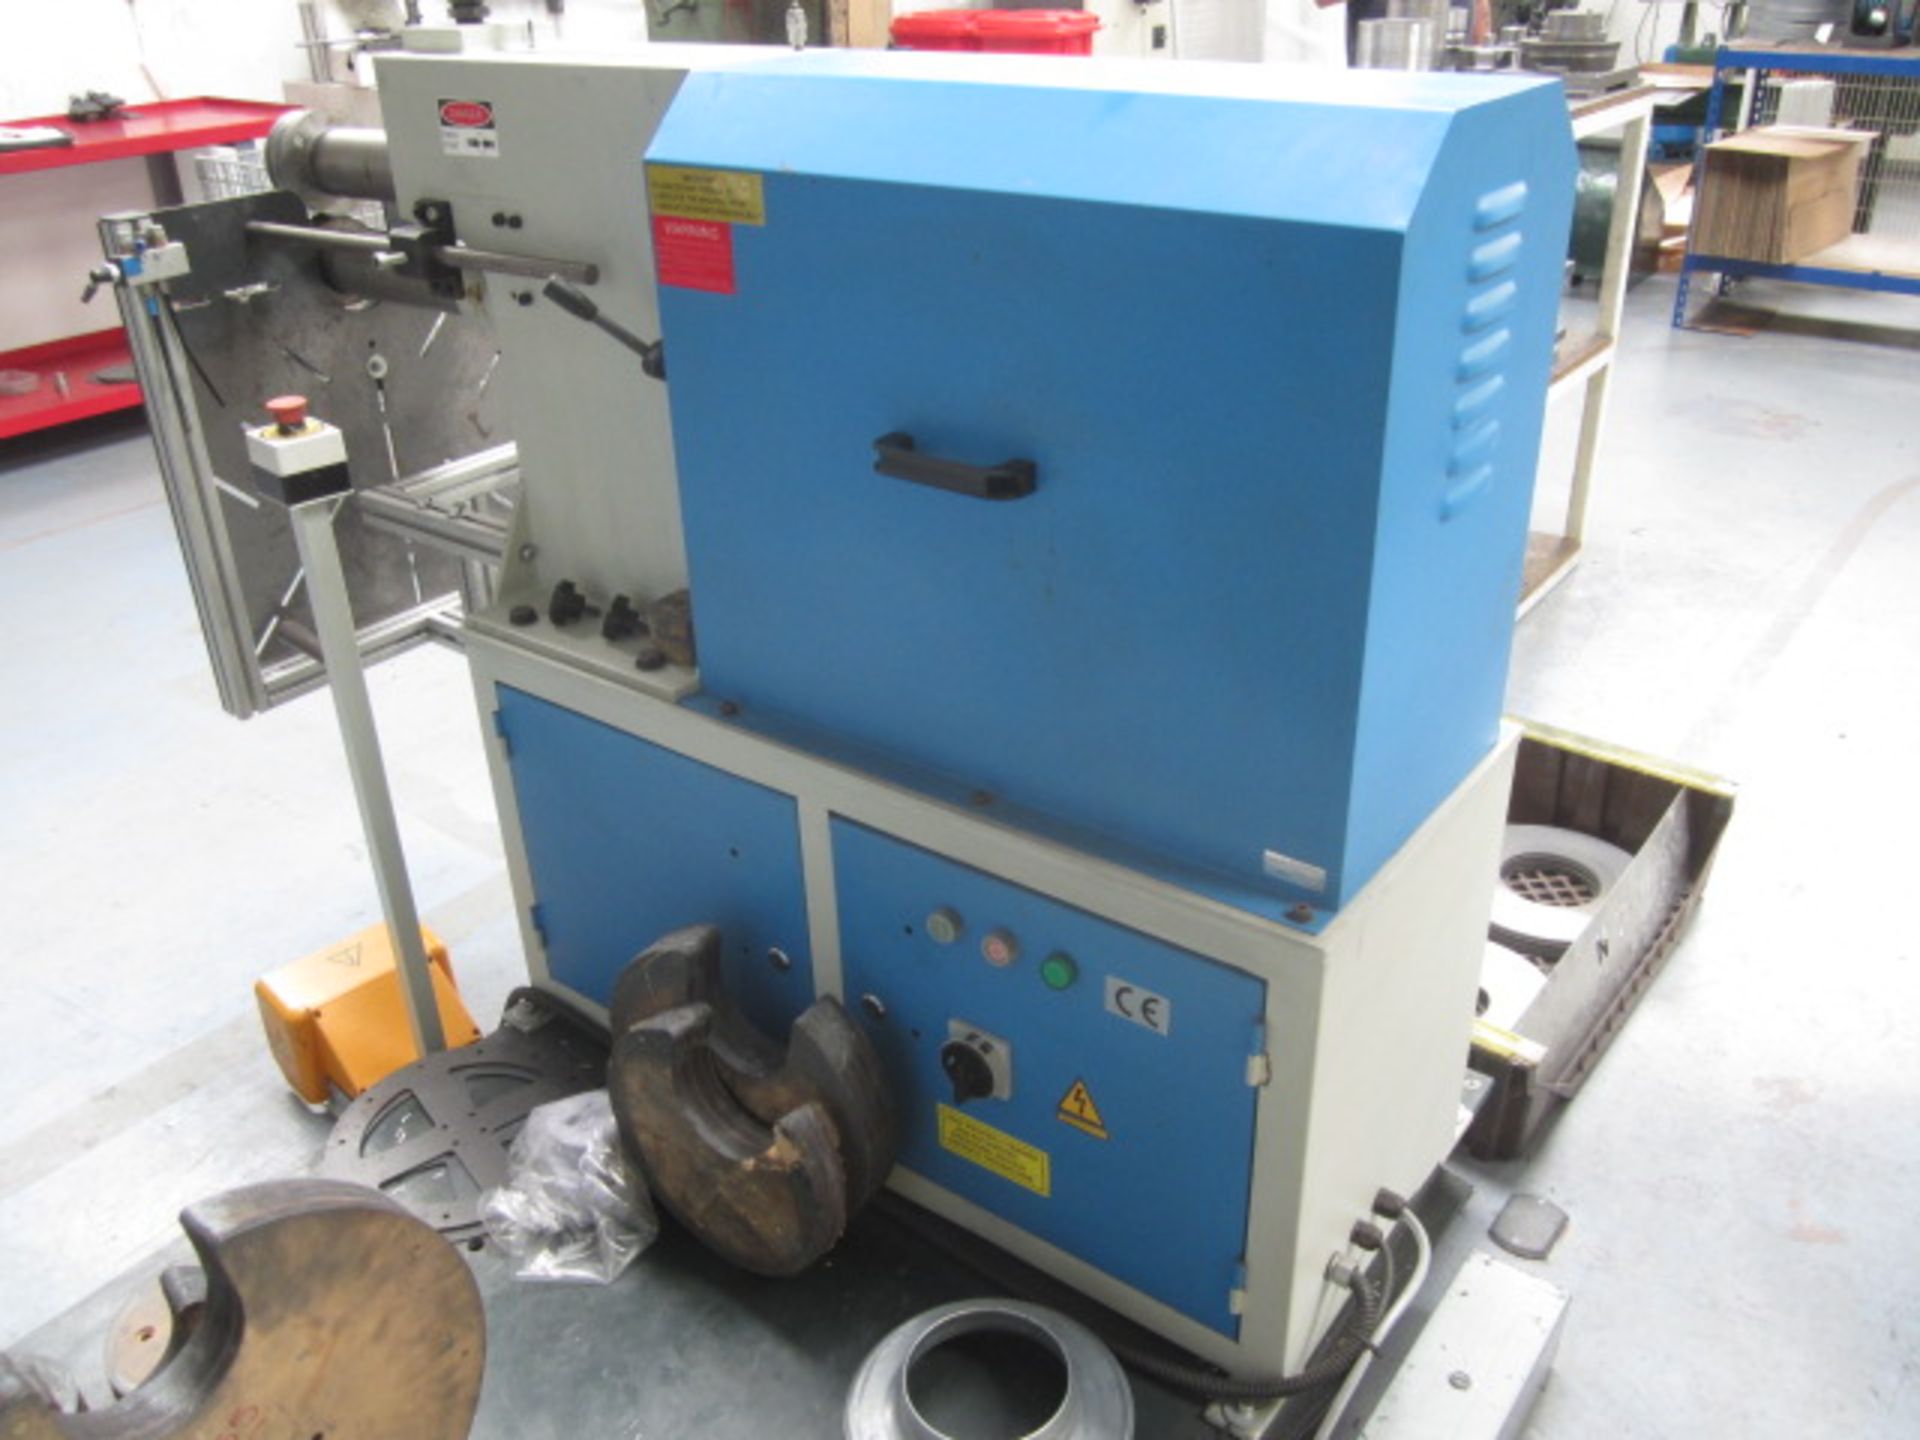 Tri-Union bead bending machine, Model: ETB-40, s/n: A140 52158 (2014) with wander foot control. A - Image 4 of 5